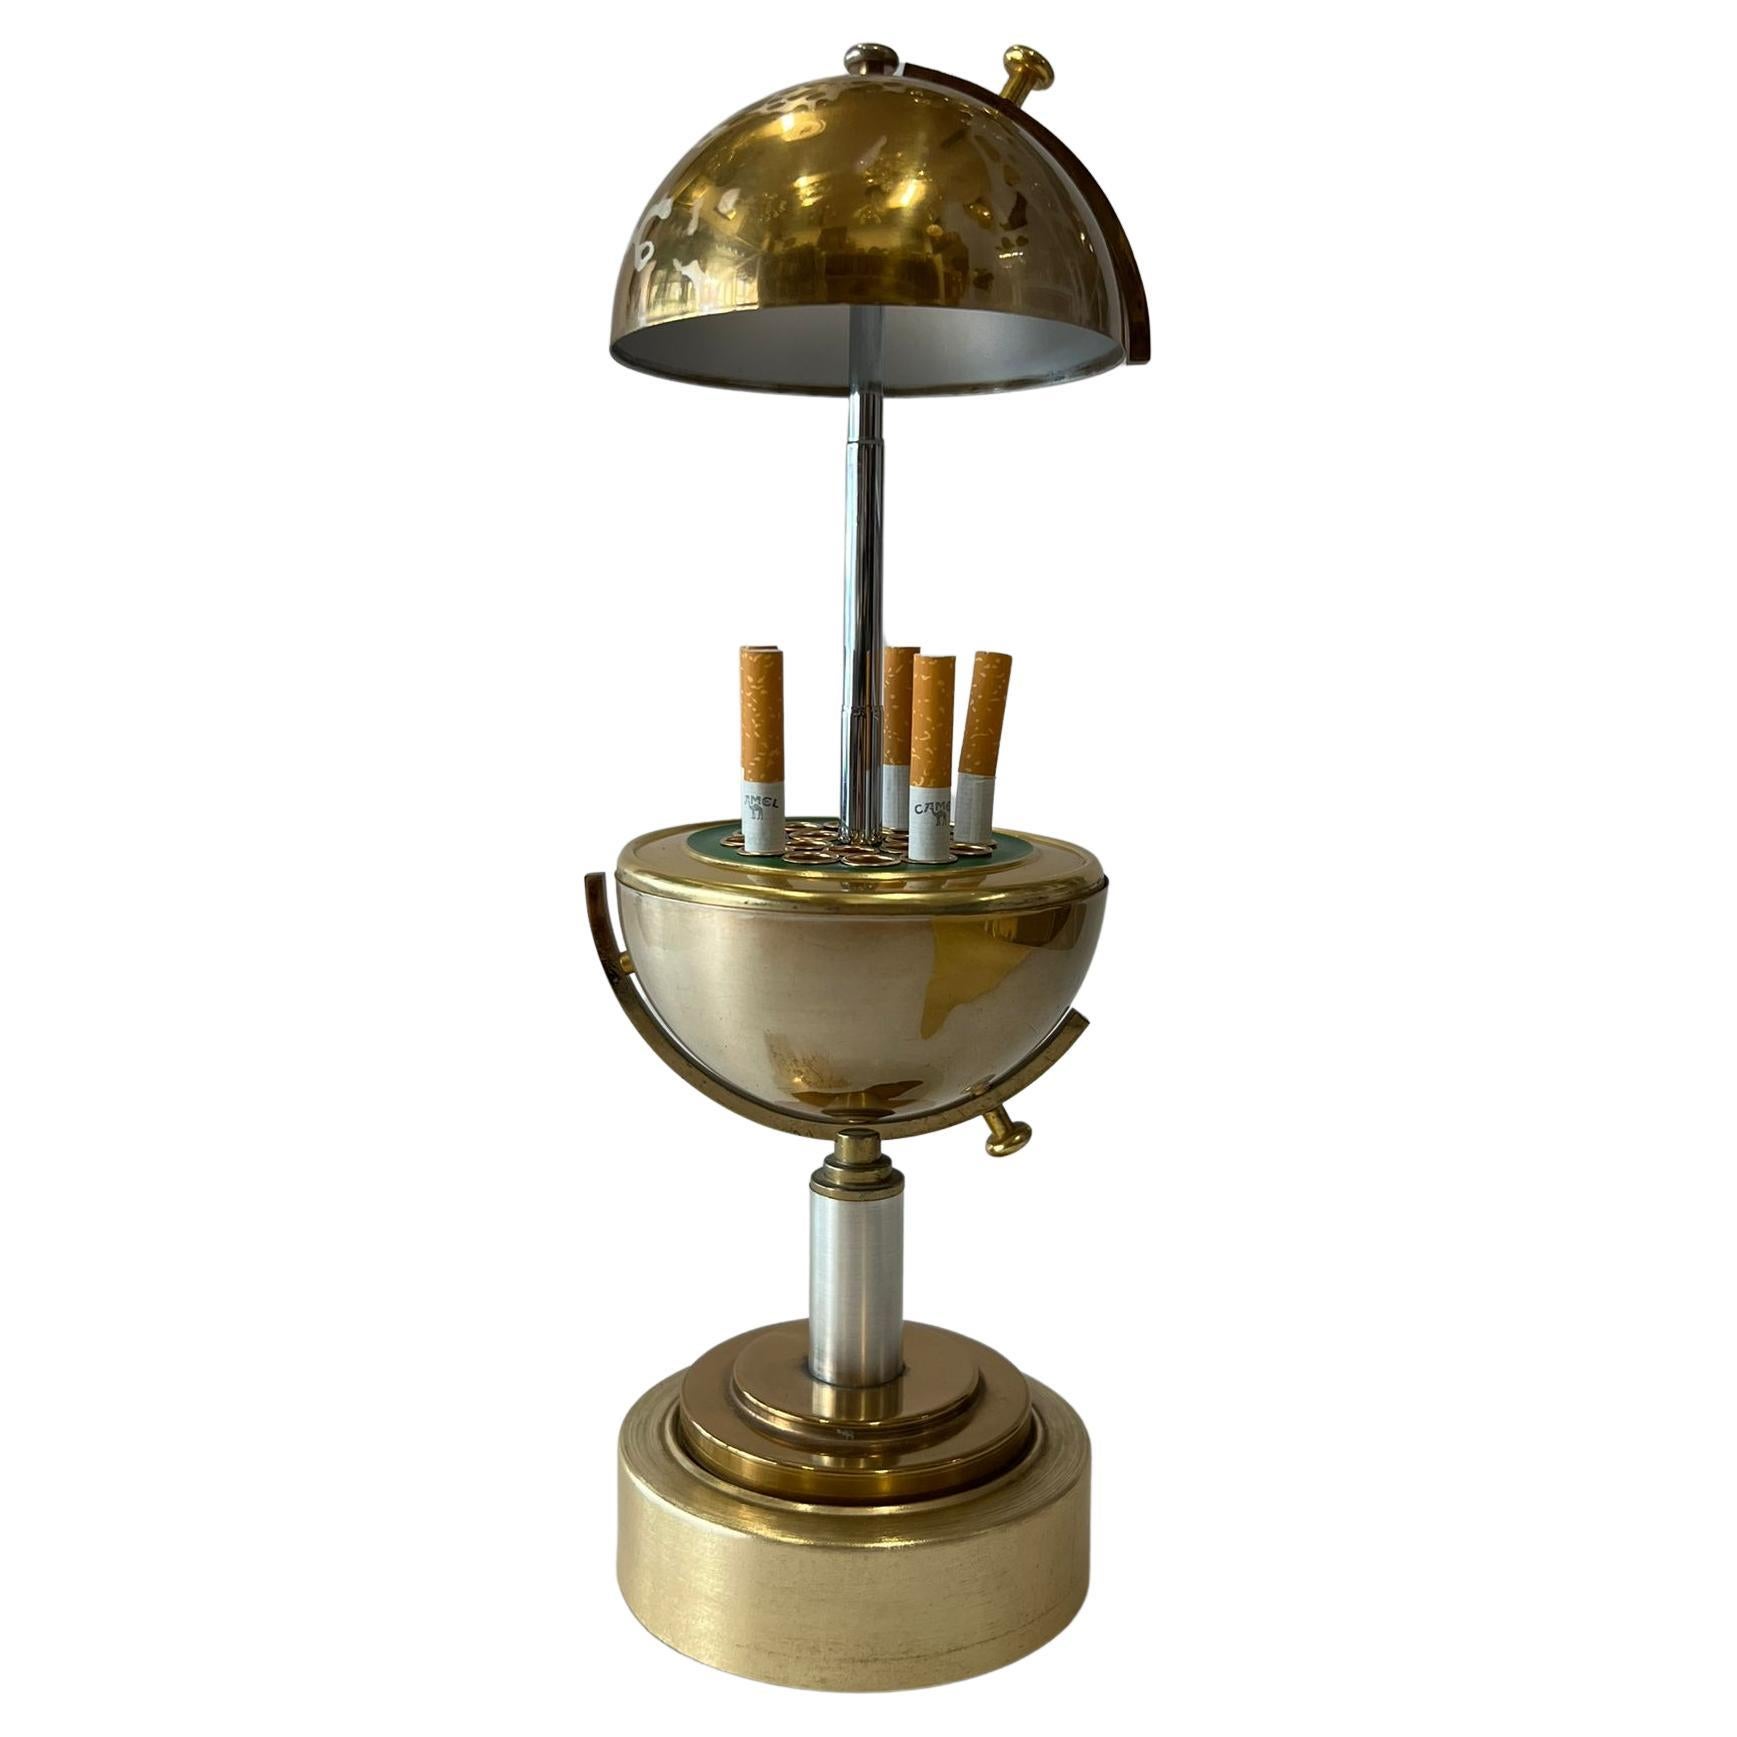 Globe Cigarette Dispenser with Music Playing Globe Lighter, Brass, Germany, 1950 For Sale 1